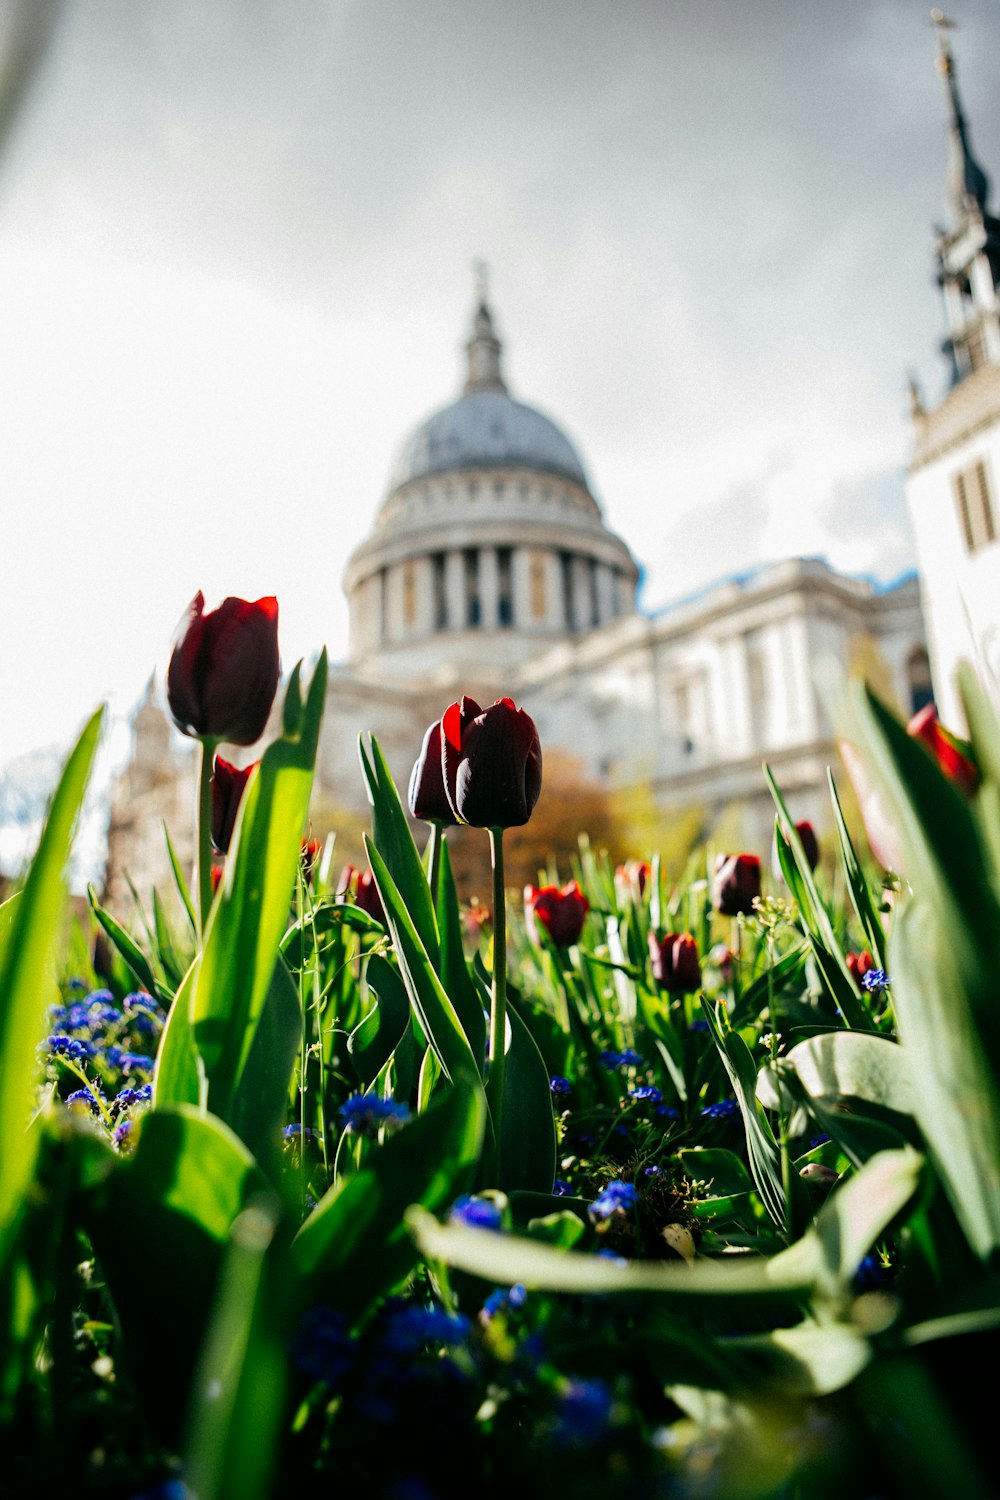 tulips and other flowers in front of a domed building